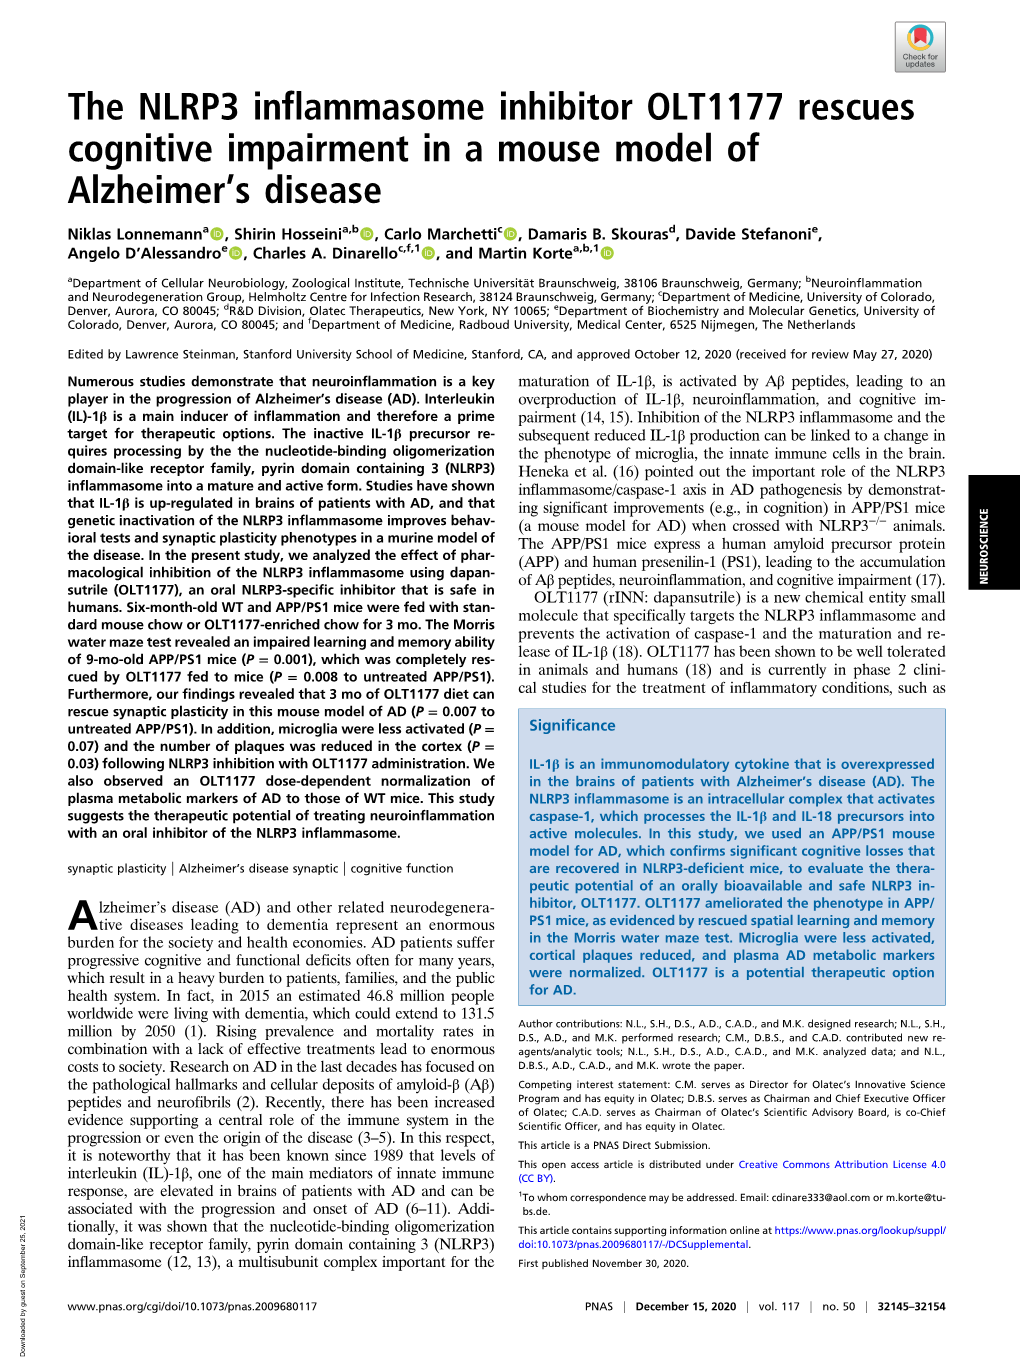 The NLRP3 Inflammasome Inhibitor OLT1177 Rescues Cognitive Impairment in a Mouse Model of Alzheimer’S Disease